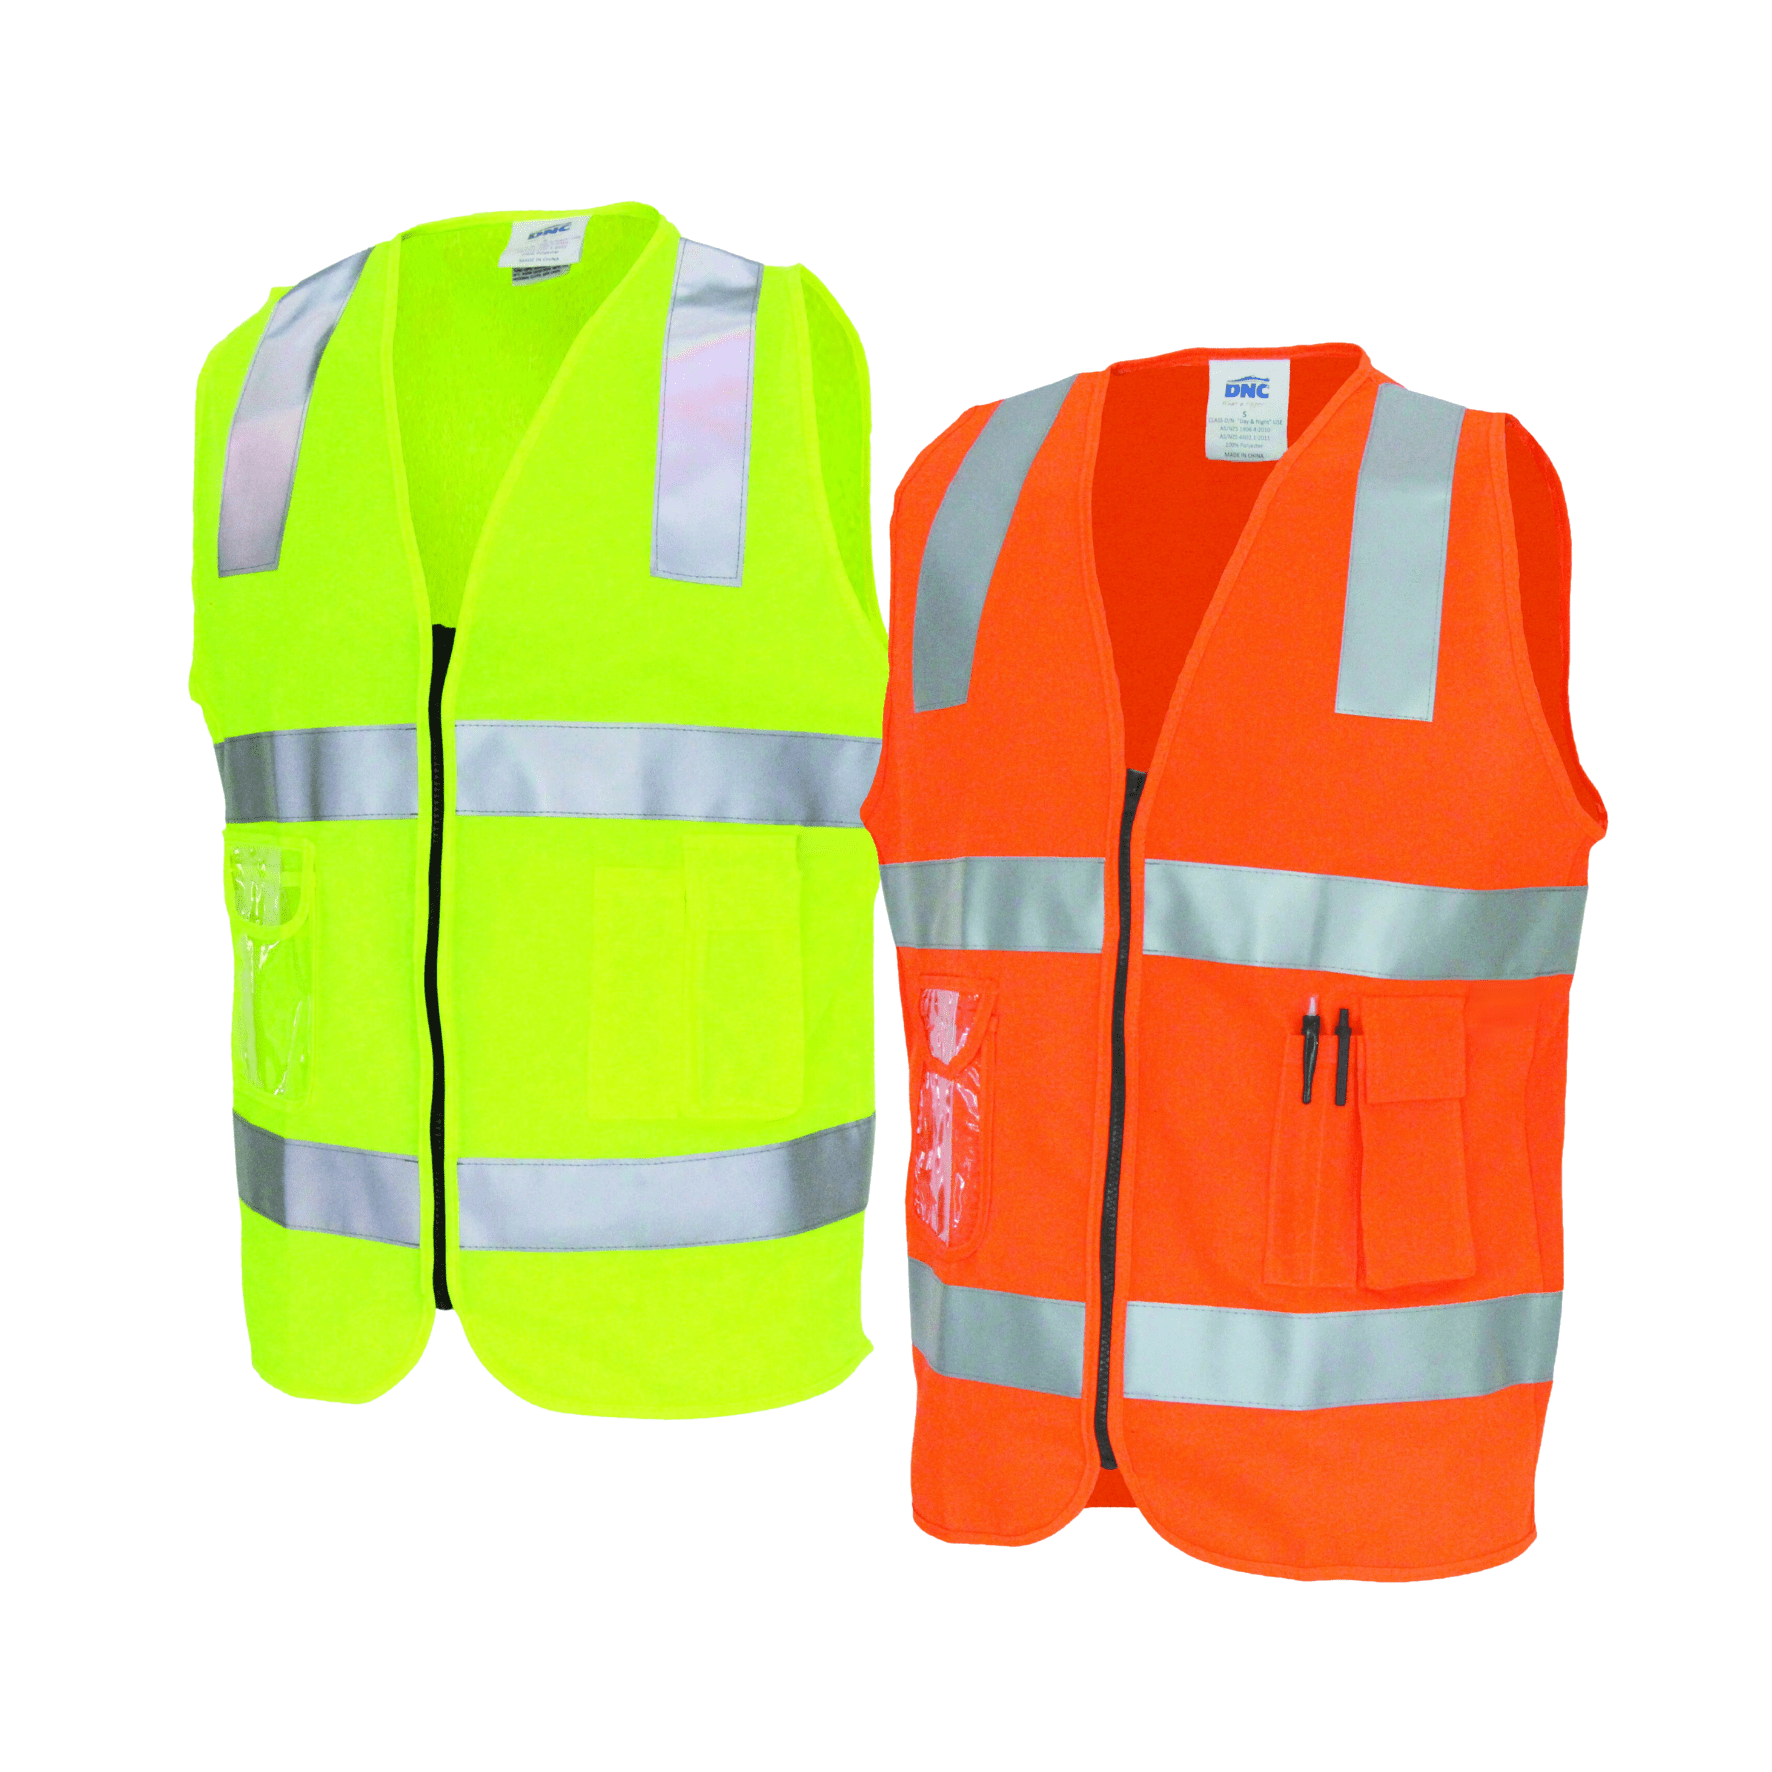 Crew Yellow High Visibility Safety Vest With 2 Pockets | eBay